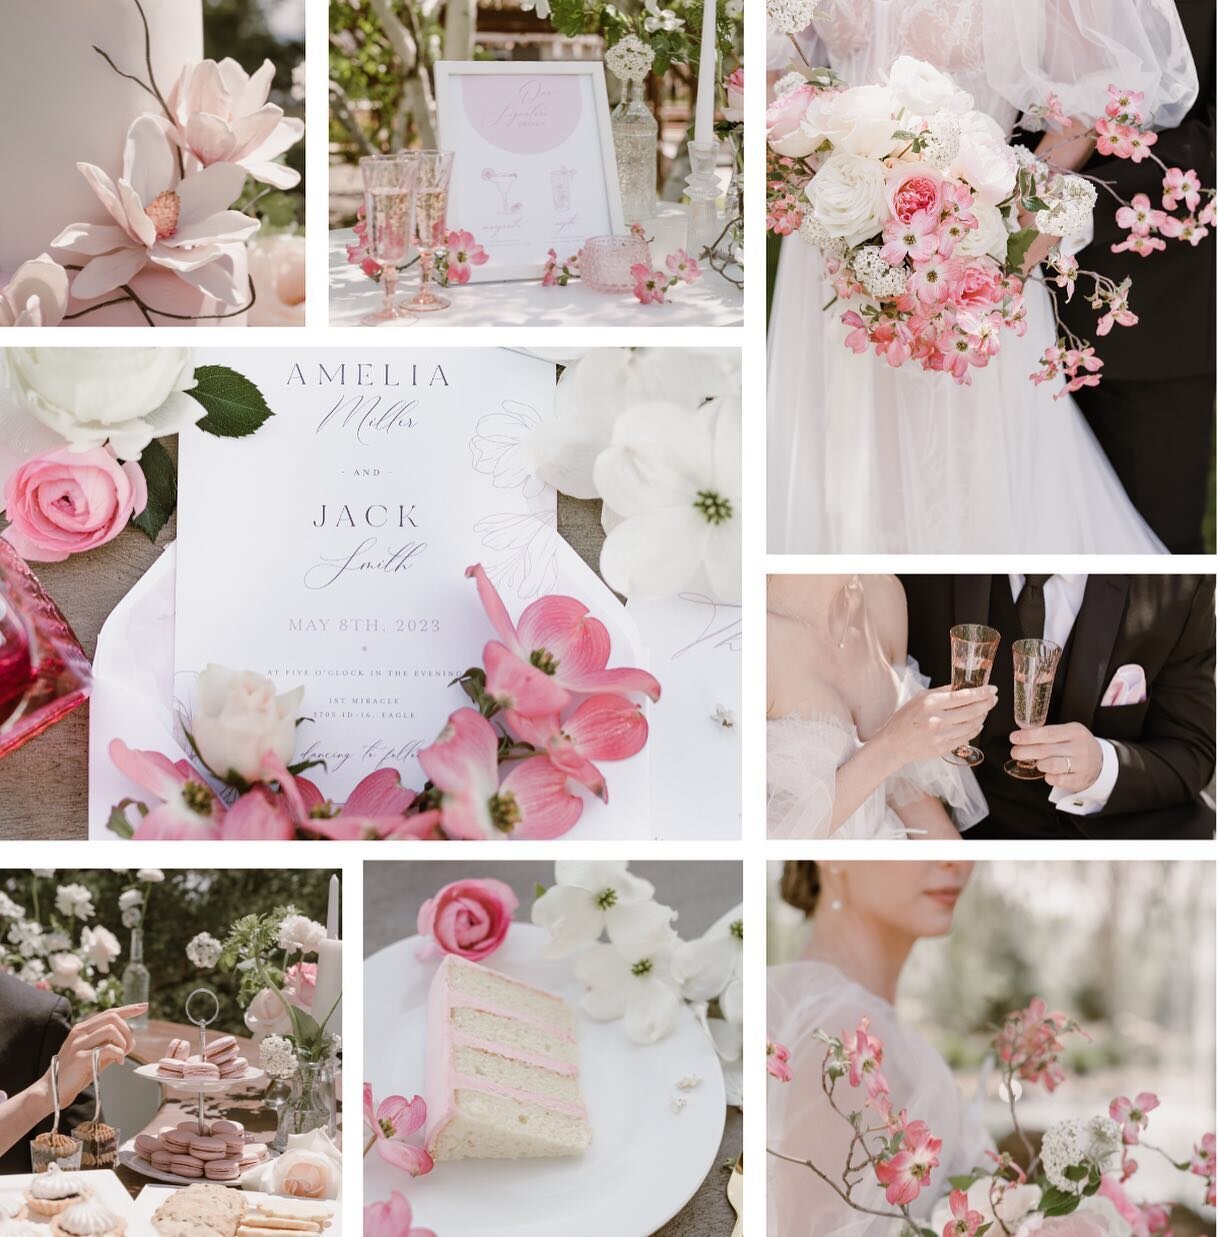 Spring is in full bloom and this Magnolia Shoot is on point!

Can not wait to share more with you. Every photo and every setup is a work of art in its own right. But, for now enjoy this little teaser🌸

Vendor Team:

Designer &amp; Planner: @Dreamere